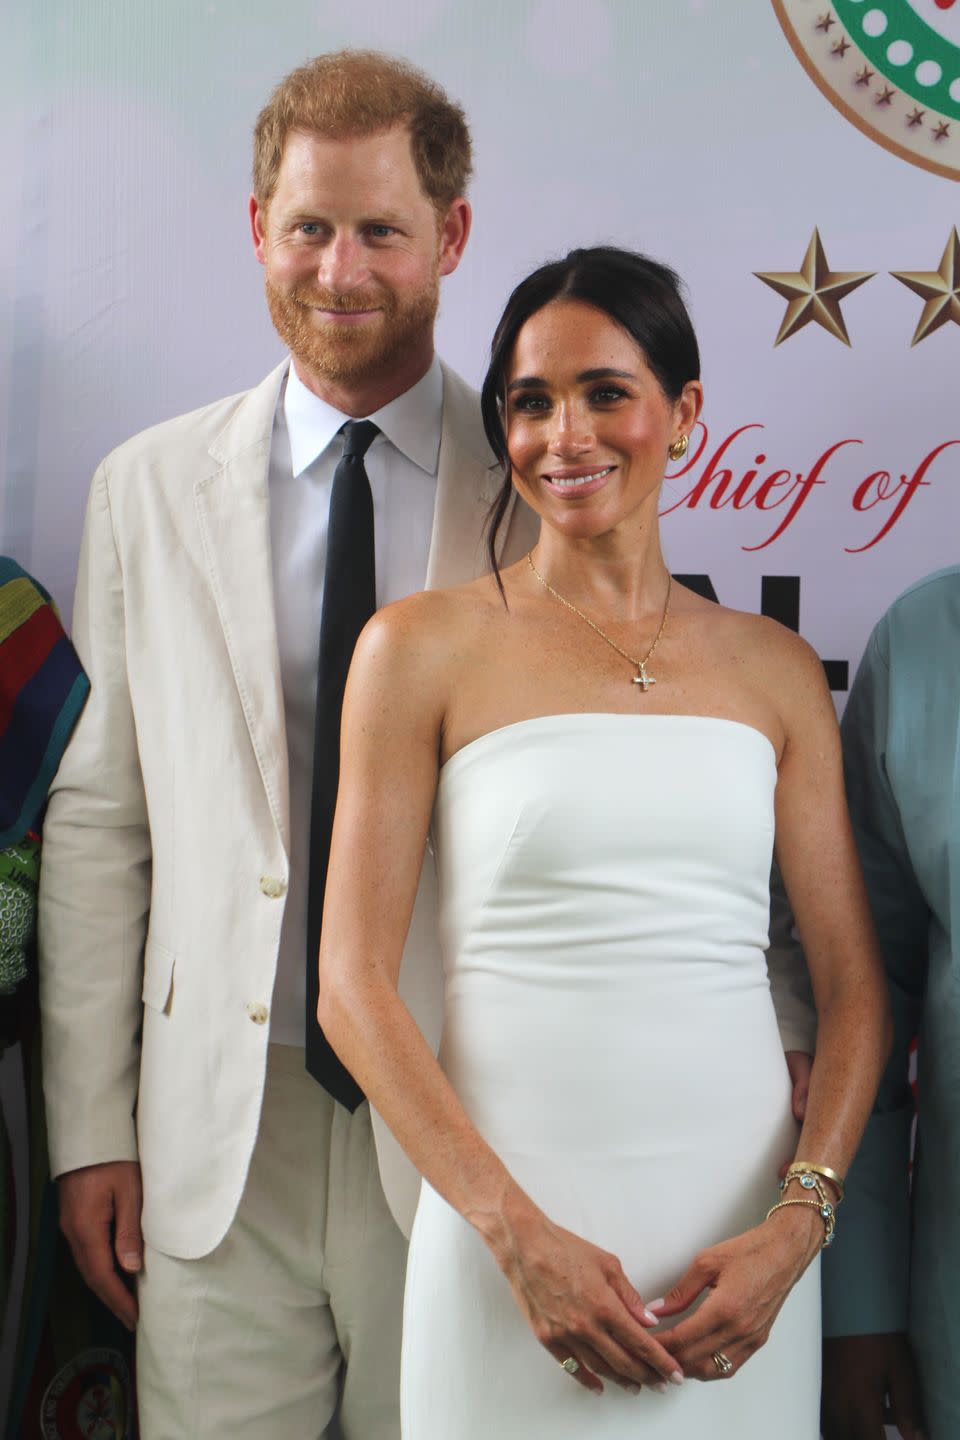 abuja, nigeria may 11 britains prince harry, duke of sussex, and britains meghan, duchess of sussex, pose for a photo as they attend the program held in the armed forces complex in abuja, nigeria on may 11, 2024 photo by emmanuel osodianadolu via getty images